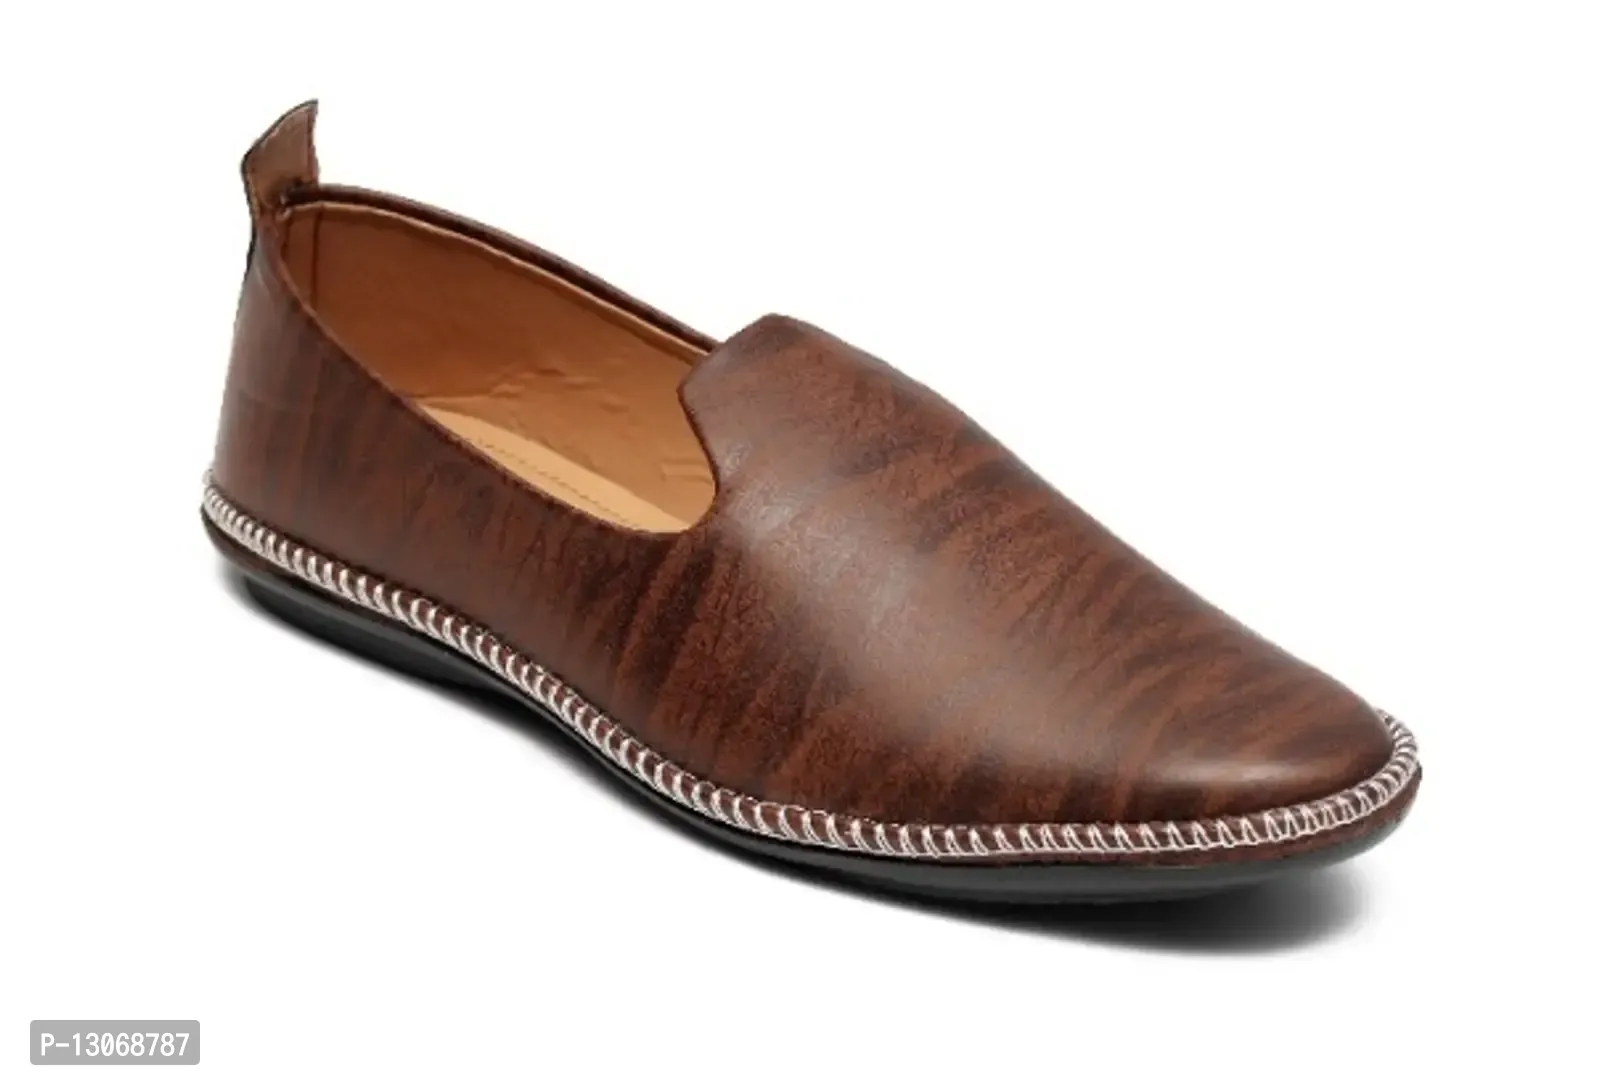 Brown Driving Loafer Shoes For Mens - UK7